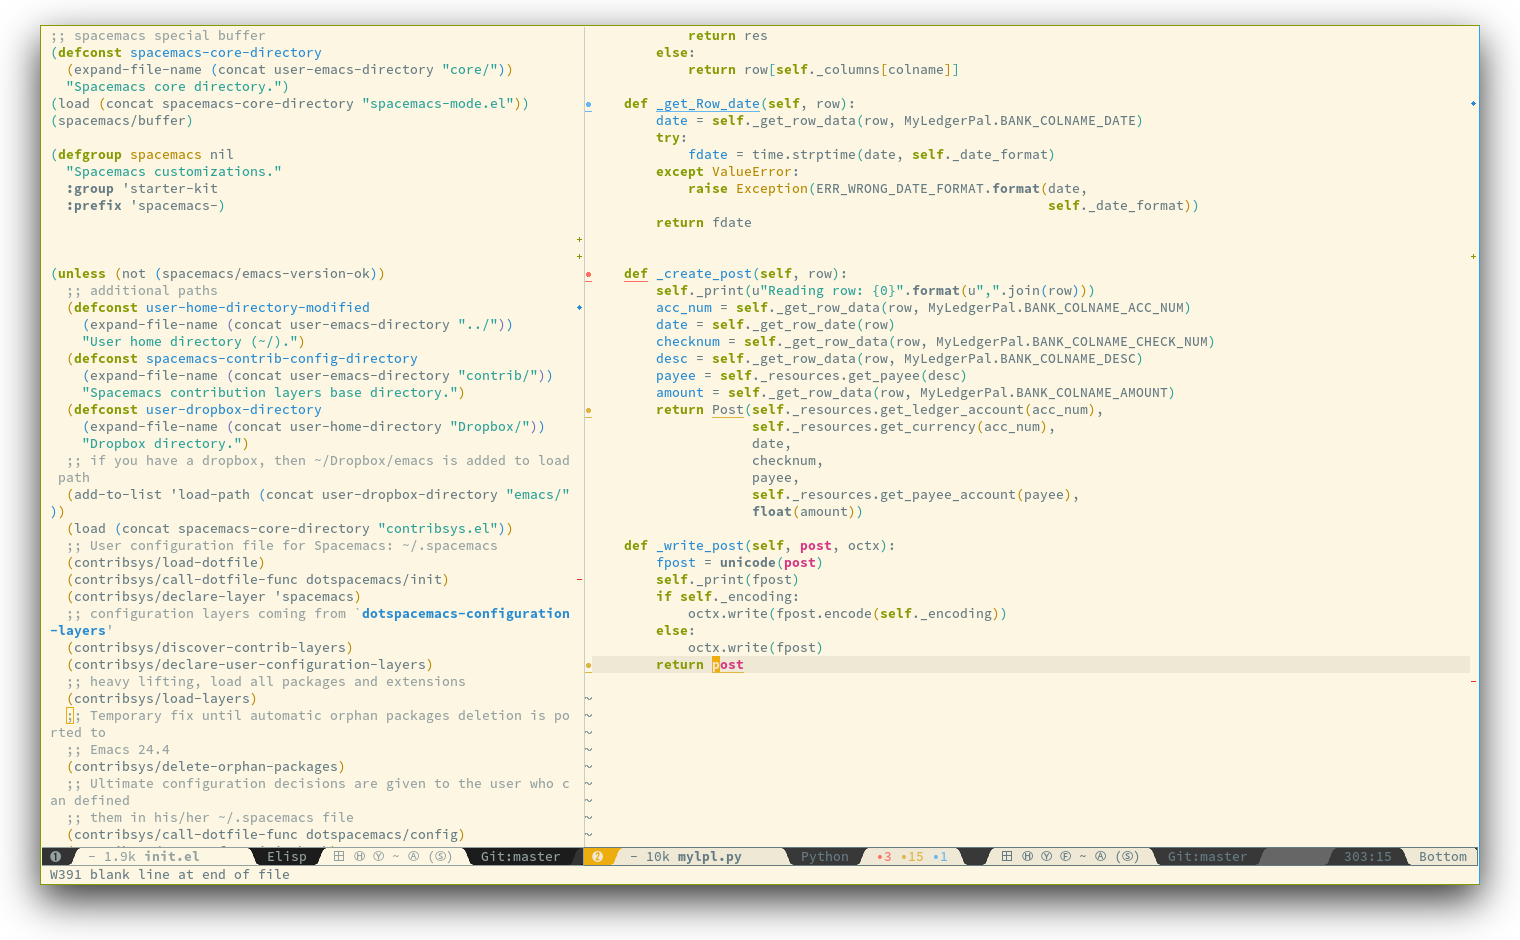 /TakeV/spacemacs/media/commit/9874e0c12cd3f35166e7222786c64858a947bfeb/doc/img/spacemacs-python.png